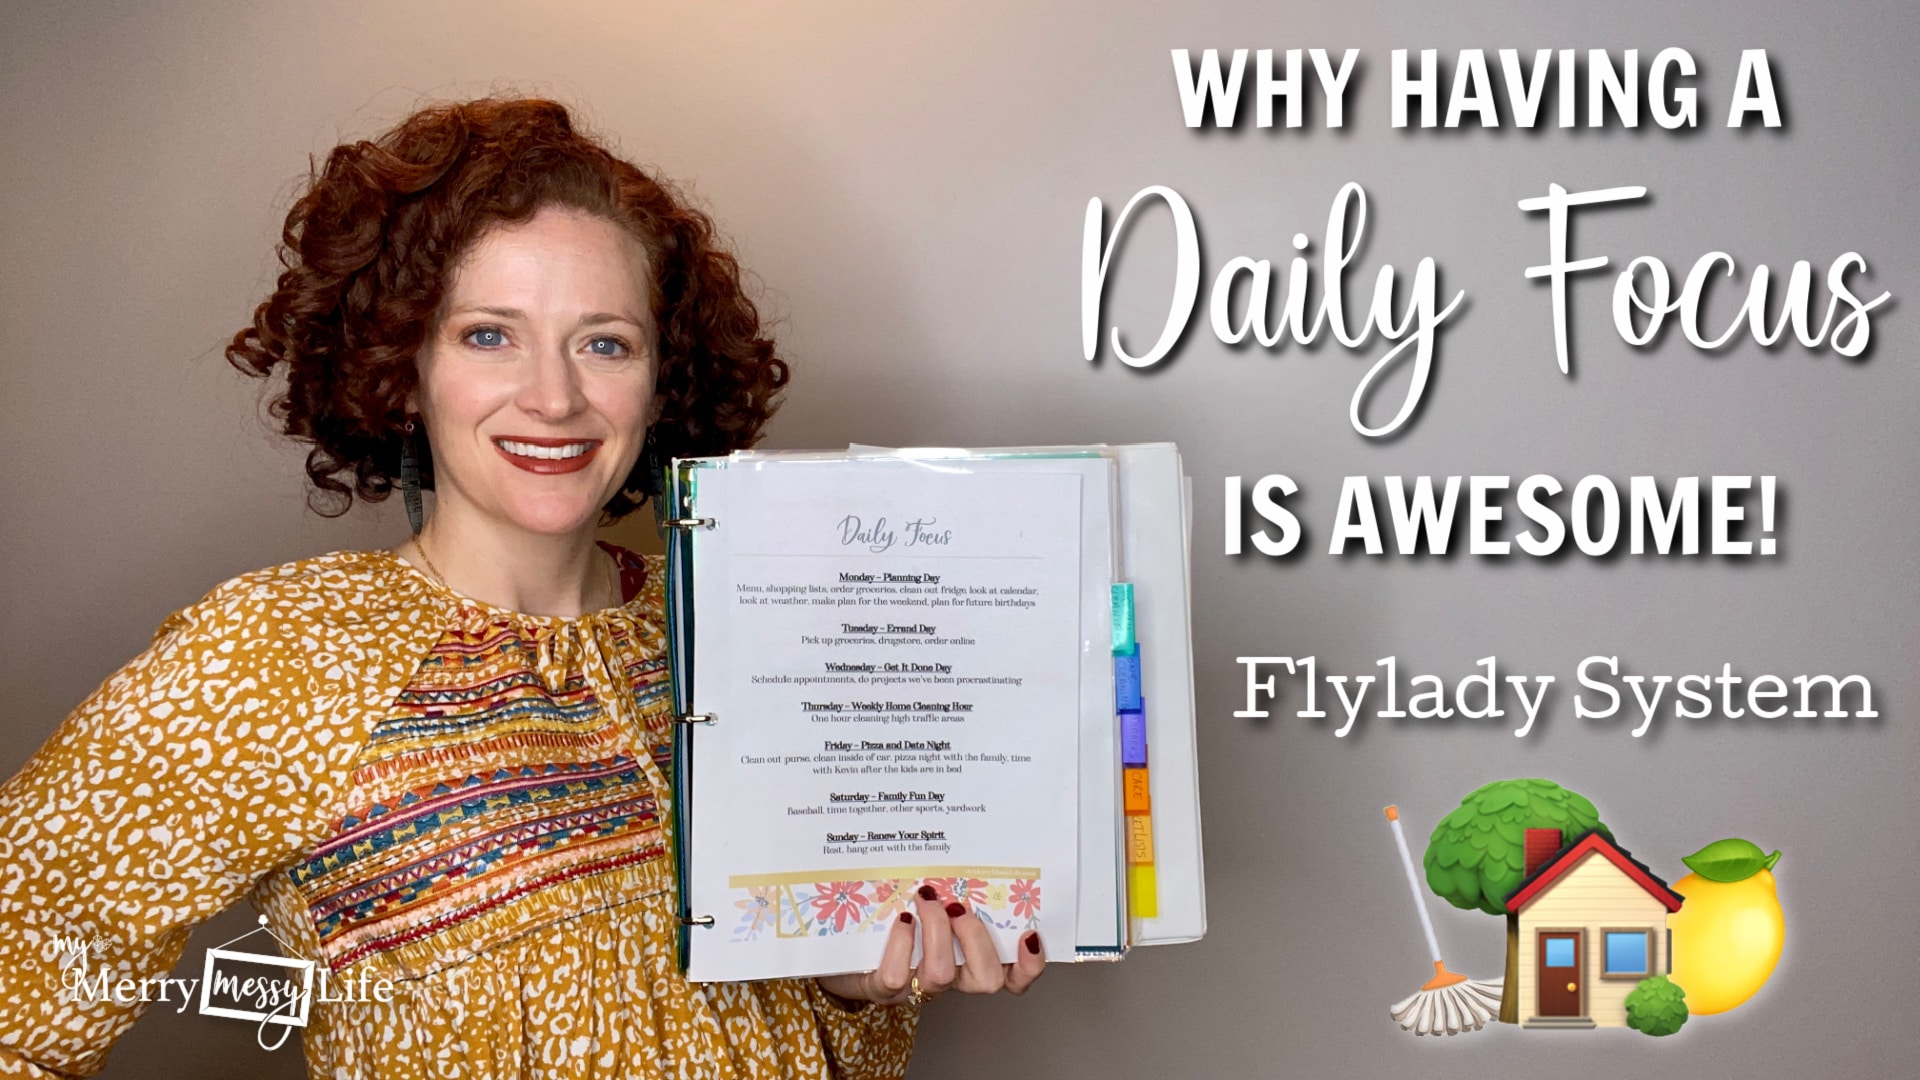 How to Create a Daily Focus and Why It's Awesome - all part of the Flylady System